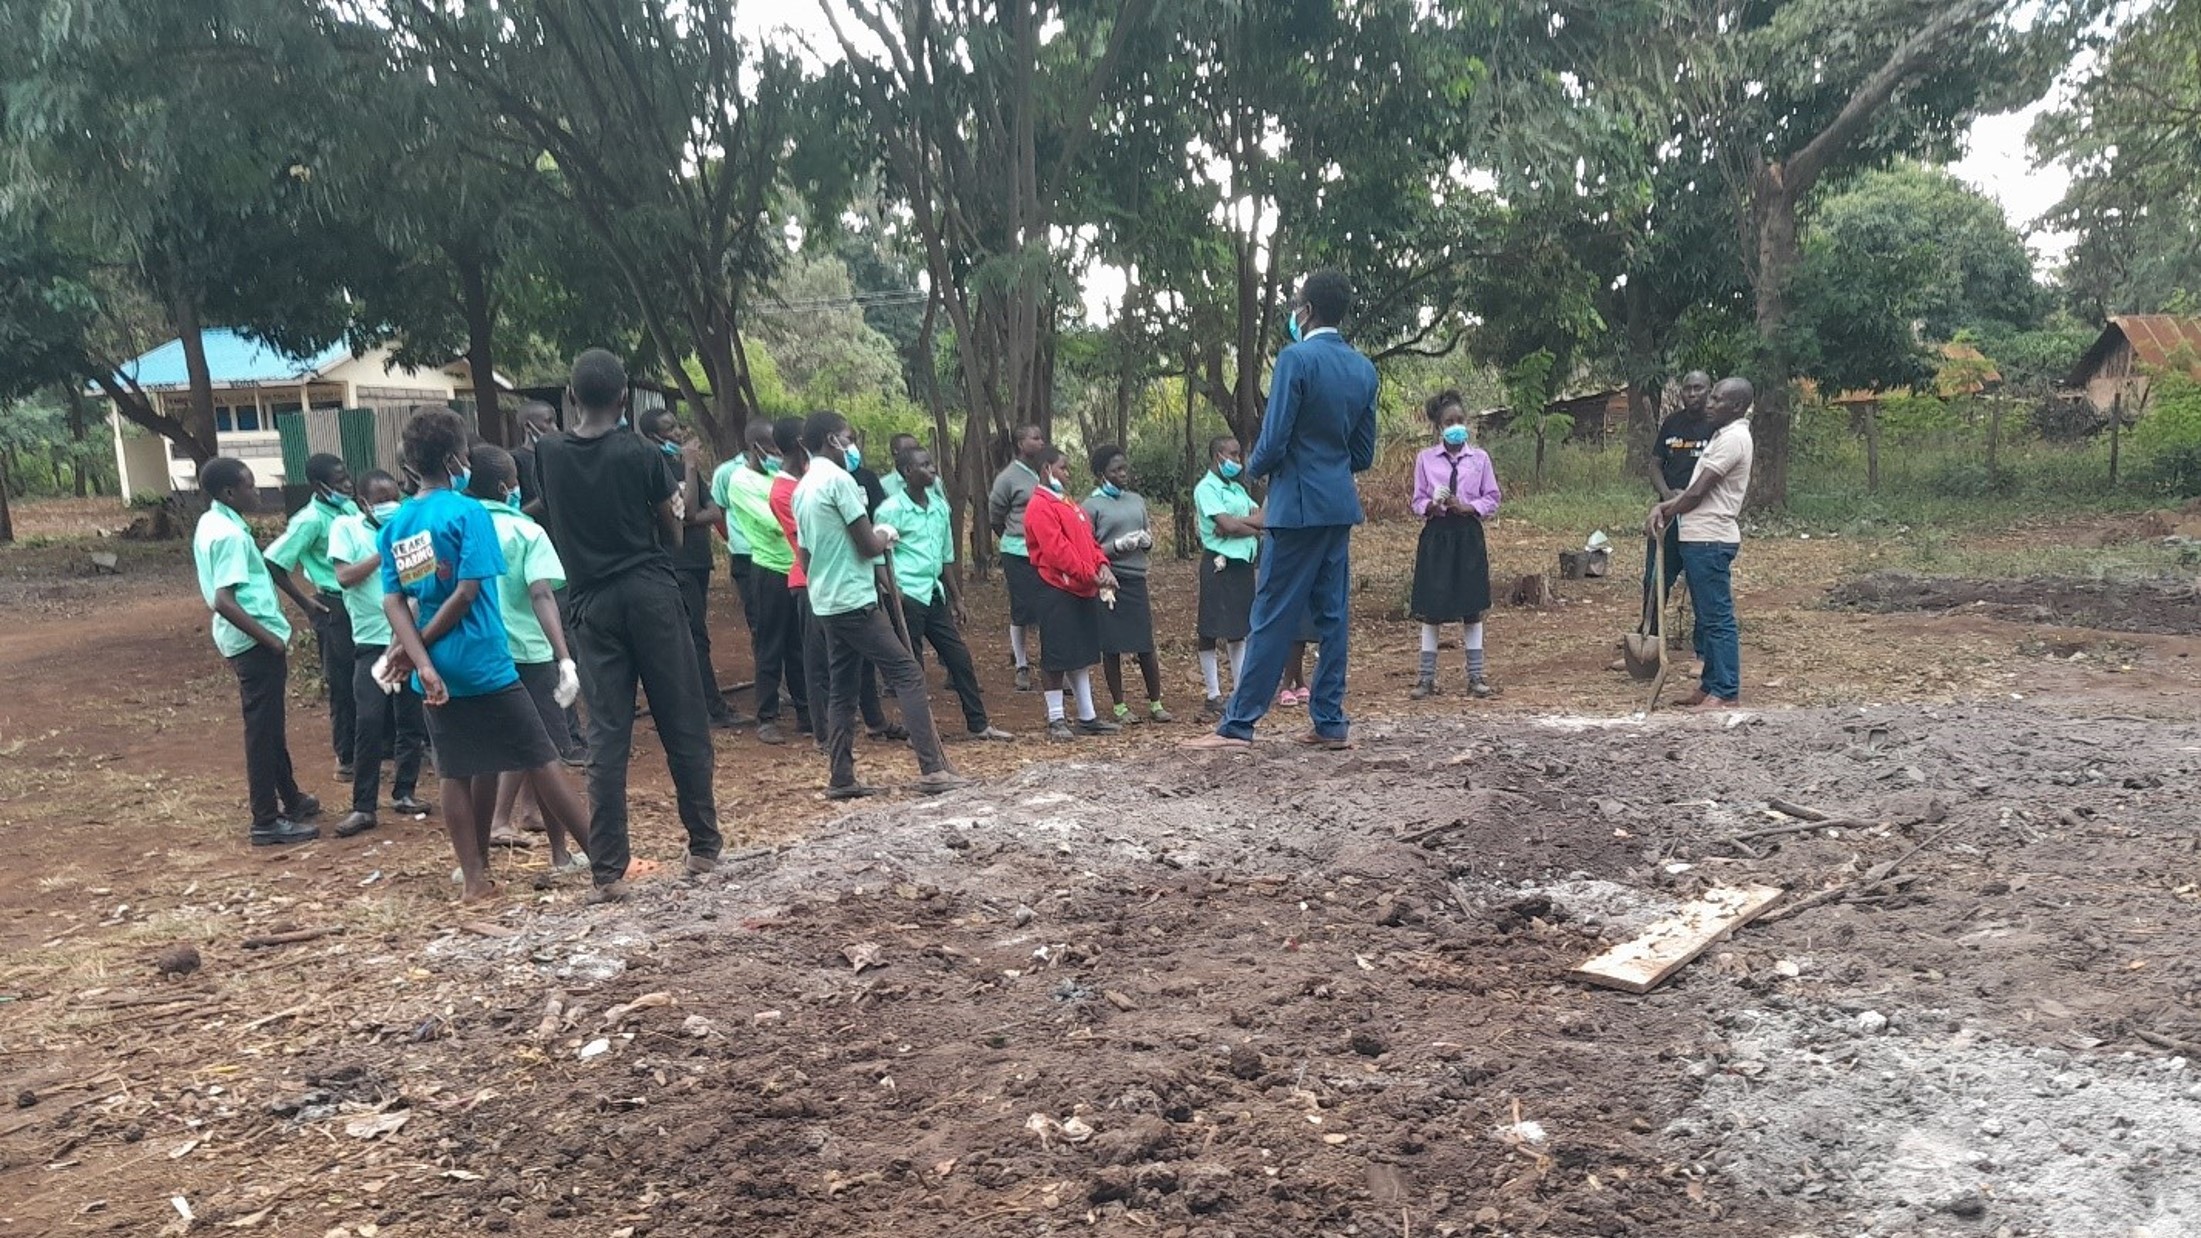 A group of school children standing next to an area of land which they have cleared